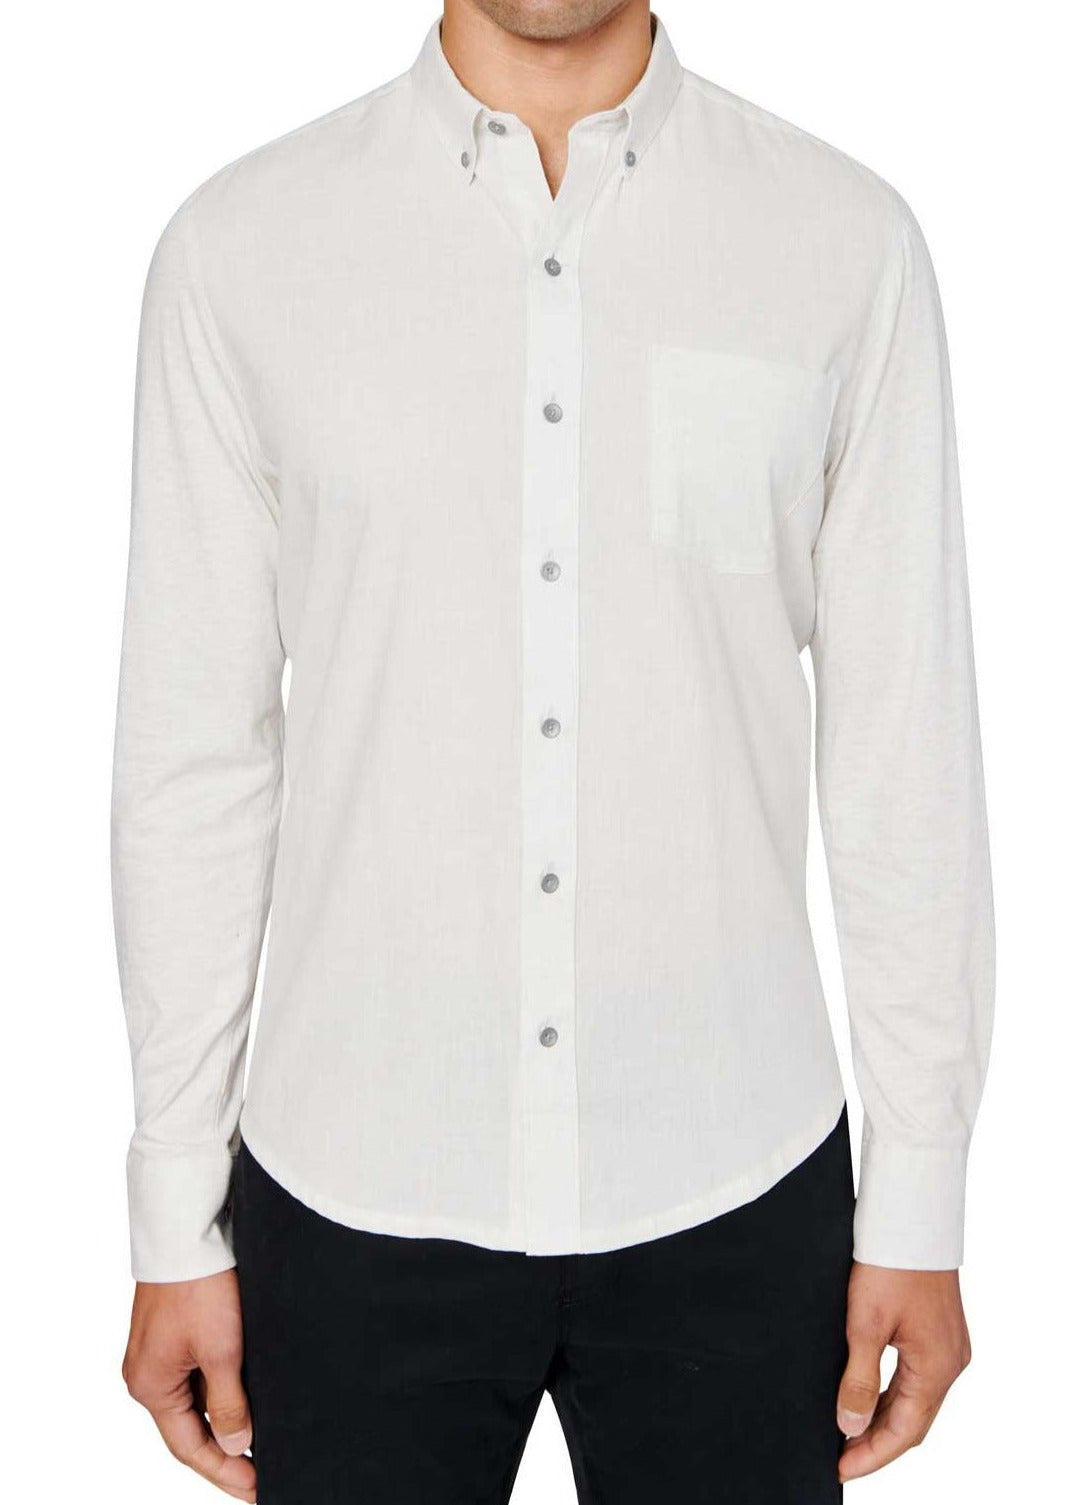 Man wearing White button up shirt and black jeans